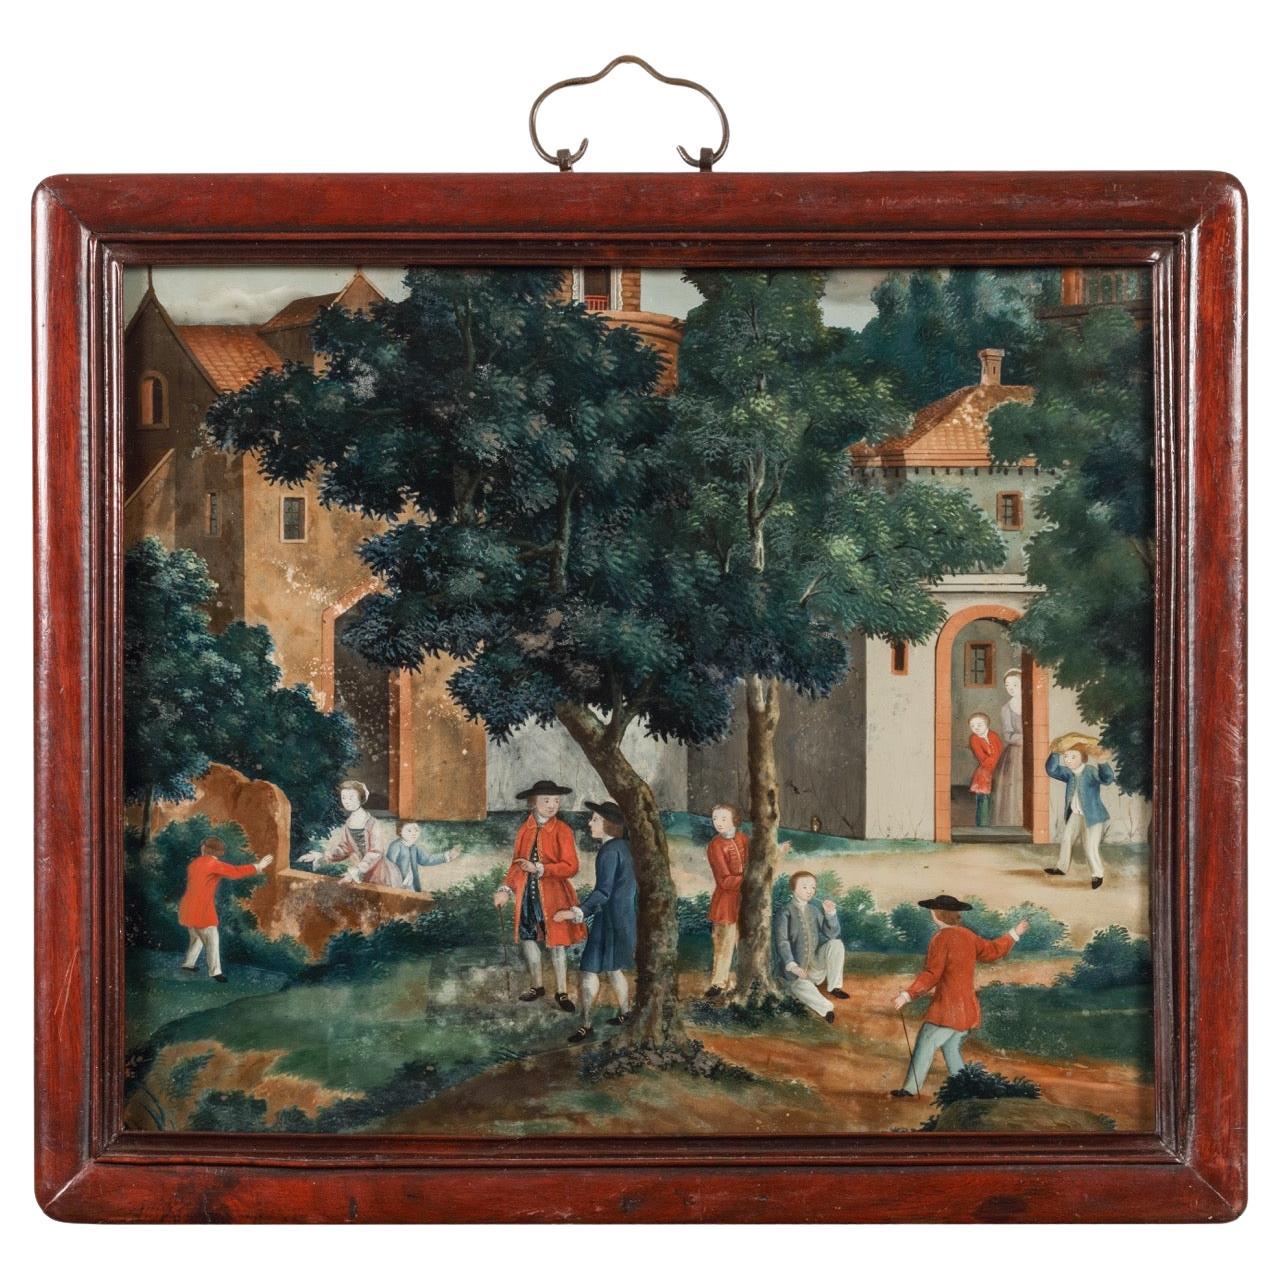 A Chinese export reverse-glass painting after an English print in original frame